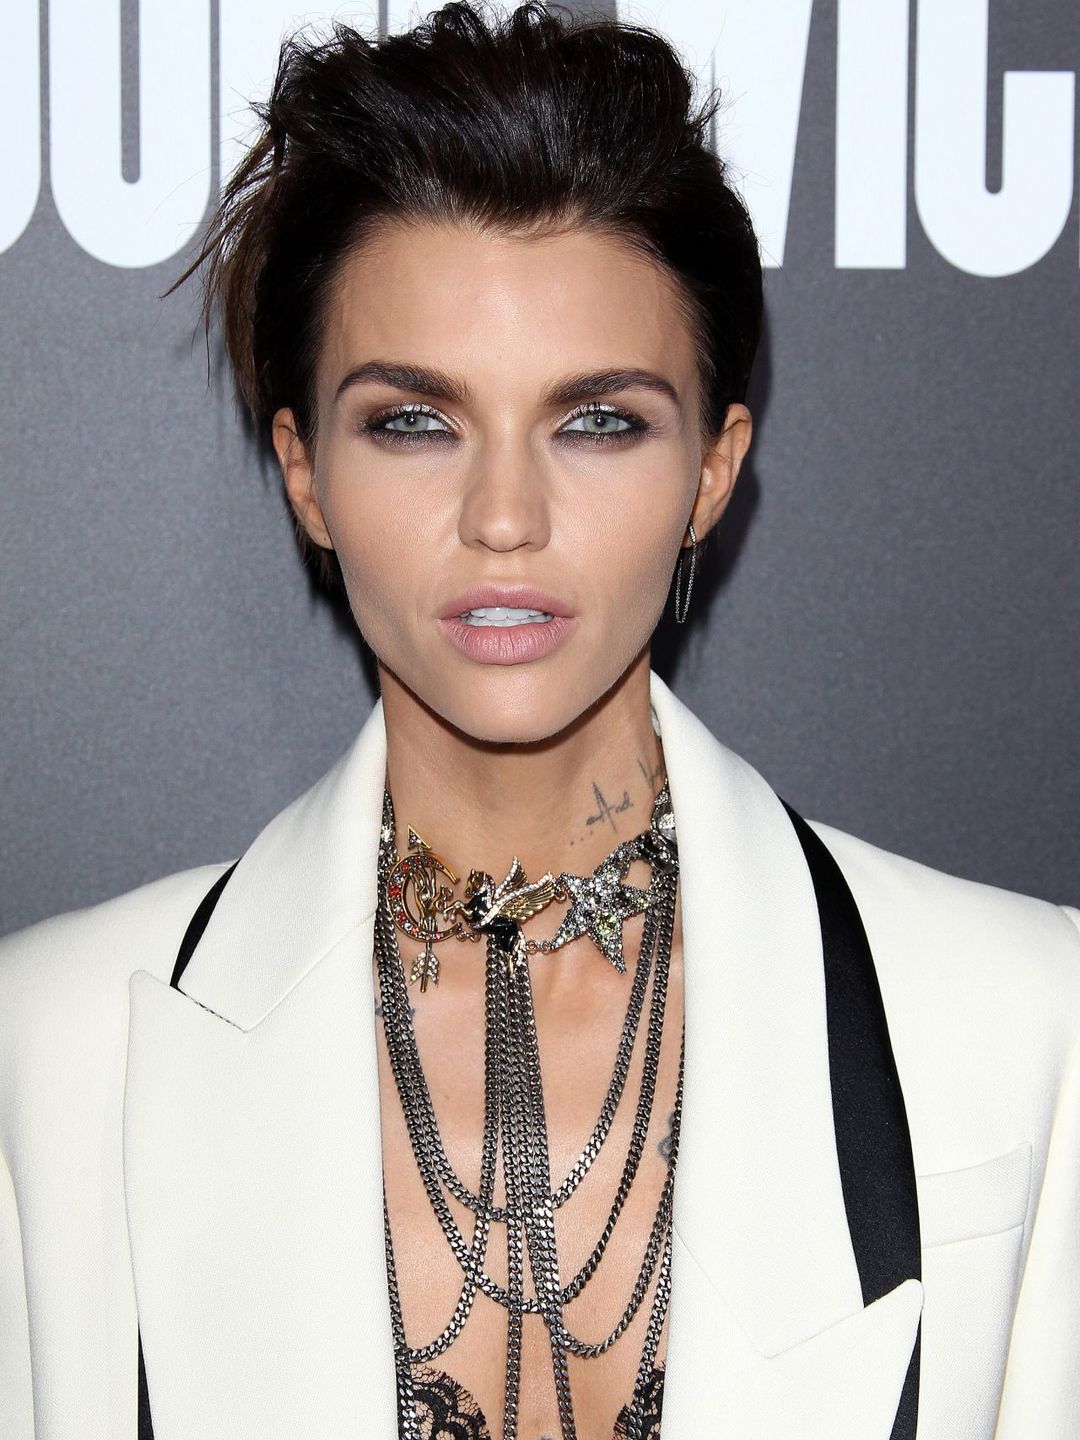 Ruby Rose who is her father